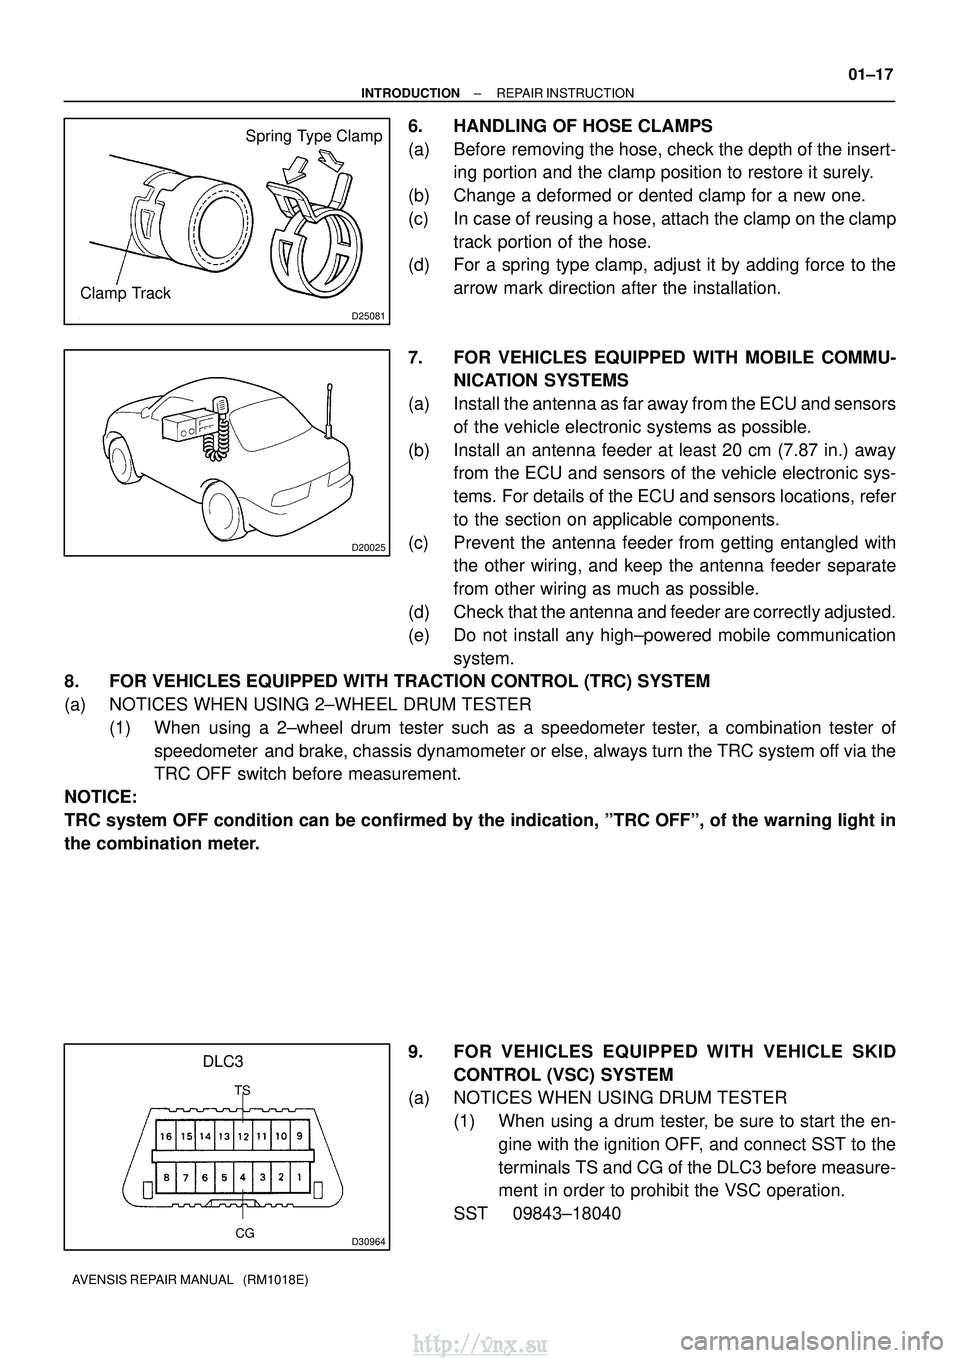 TOYOTA AVENSIS 2003  Service Repair Manual D25081
 Spring Type Clamp
Clamp Track
D20025
CG
DLC3
TS
D30964
±
INTRODUCTION REPAIR INSTRUCTION
01±17
AVENSIS REPAIR MANUAL   (RM1018E)
6. HANDLING OF HOSE CLAMPS
(a) Before removing the hose, chec